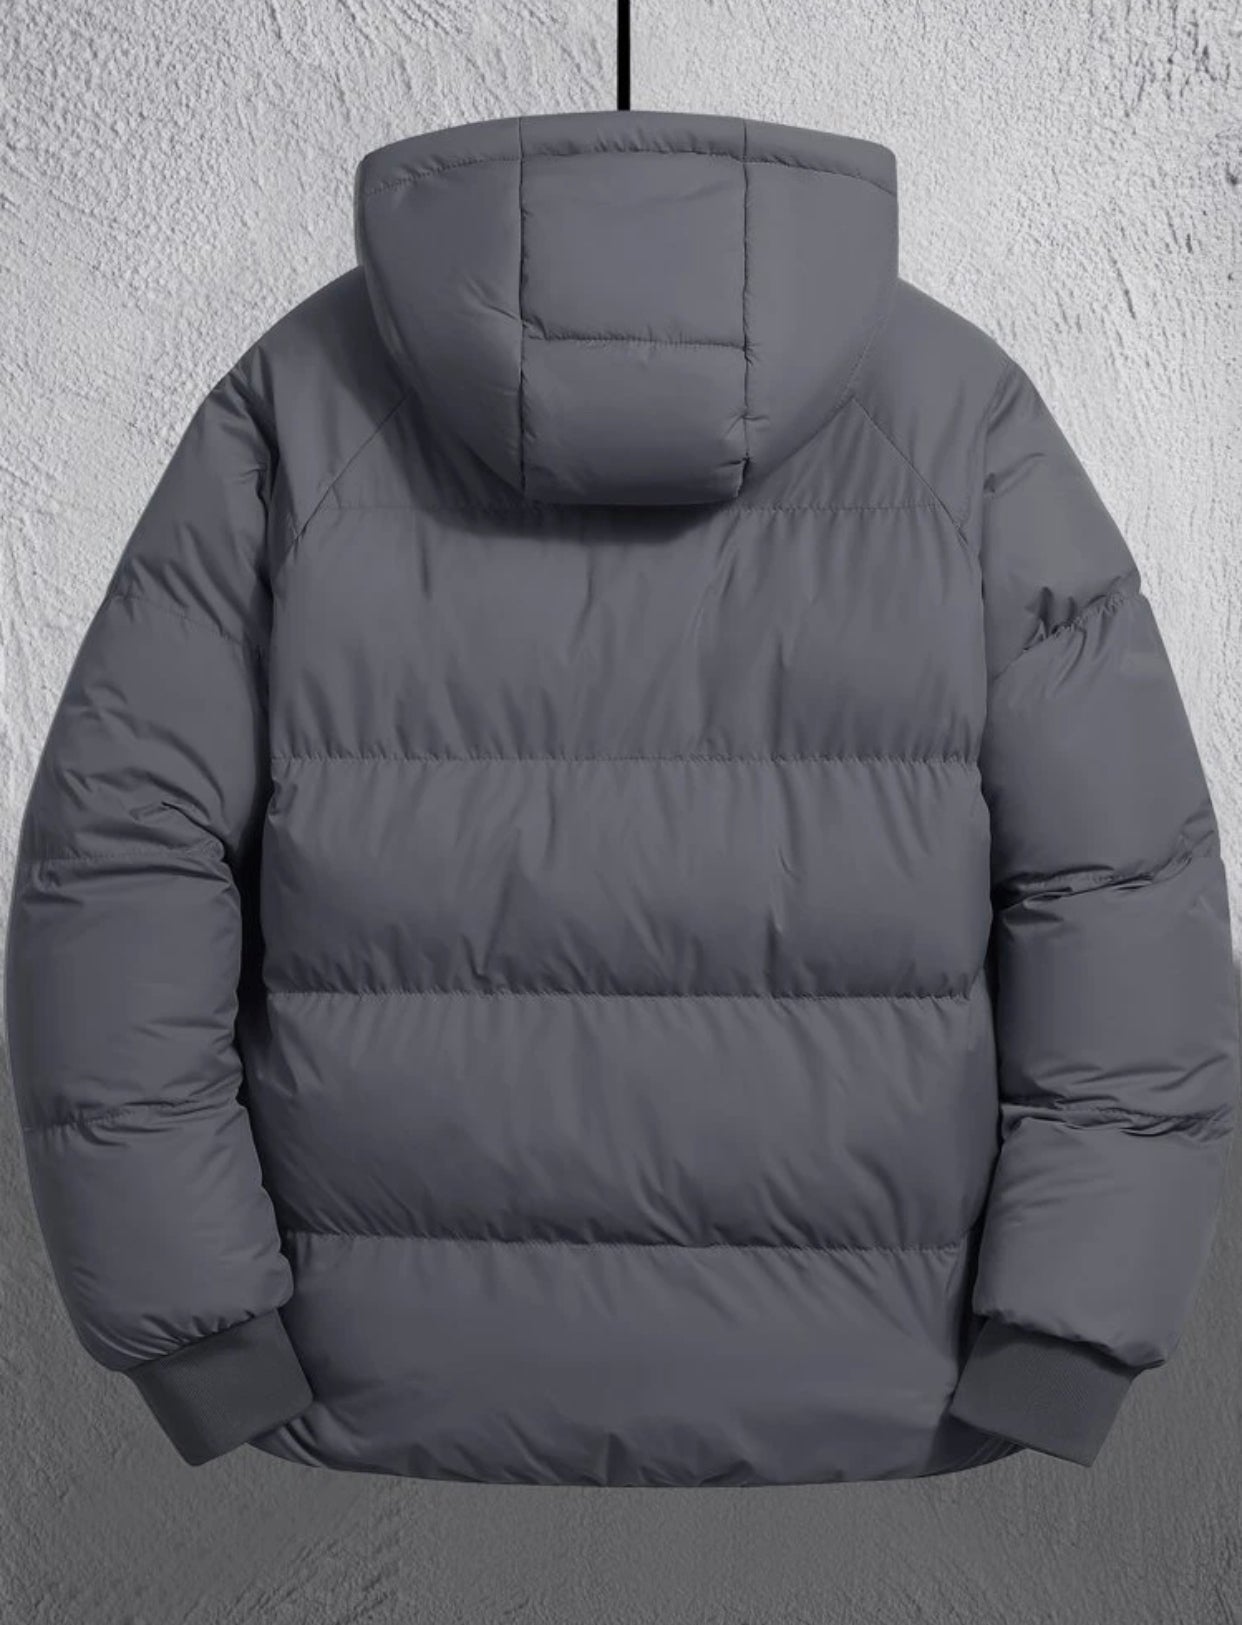 Charcoal Grey Hooded Puffer Jacket